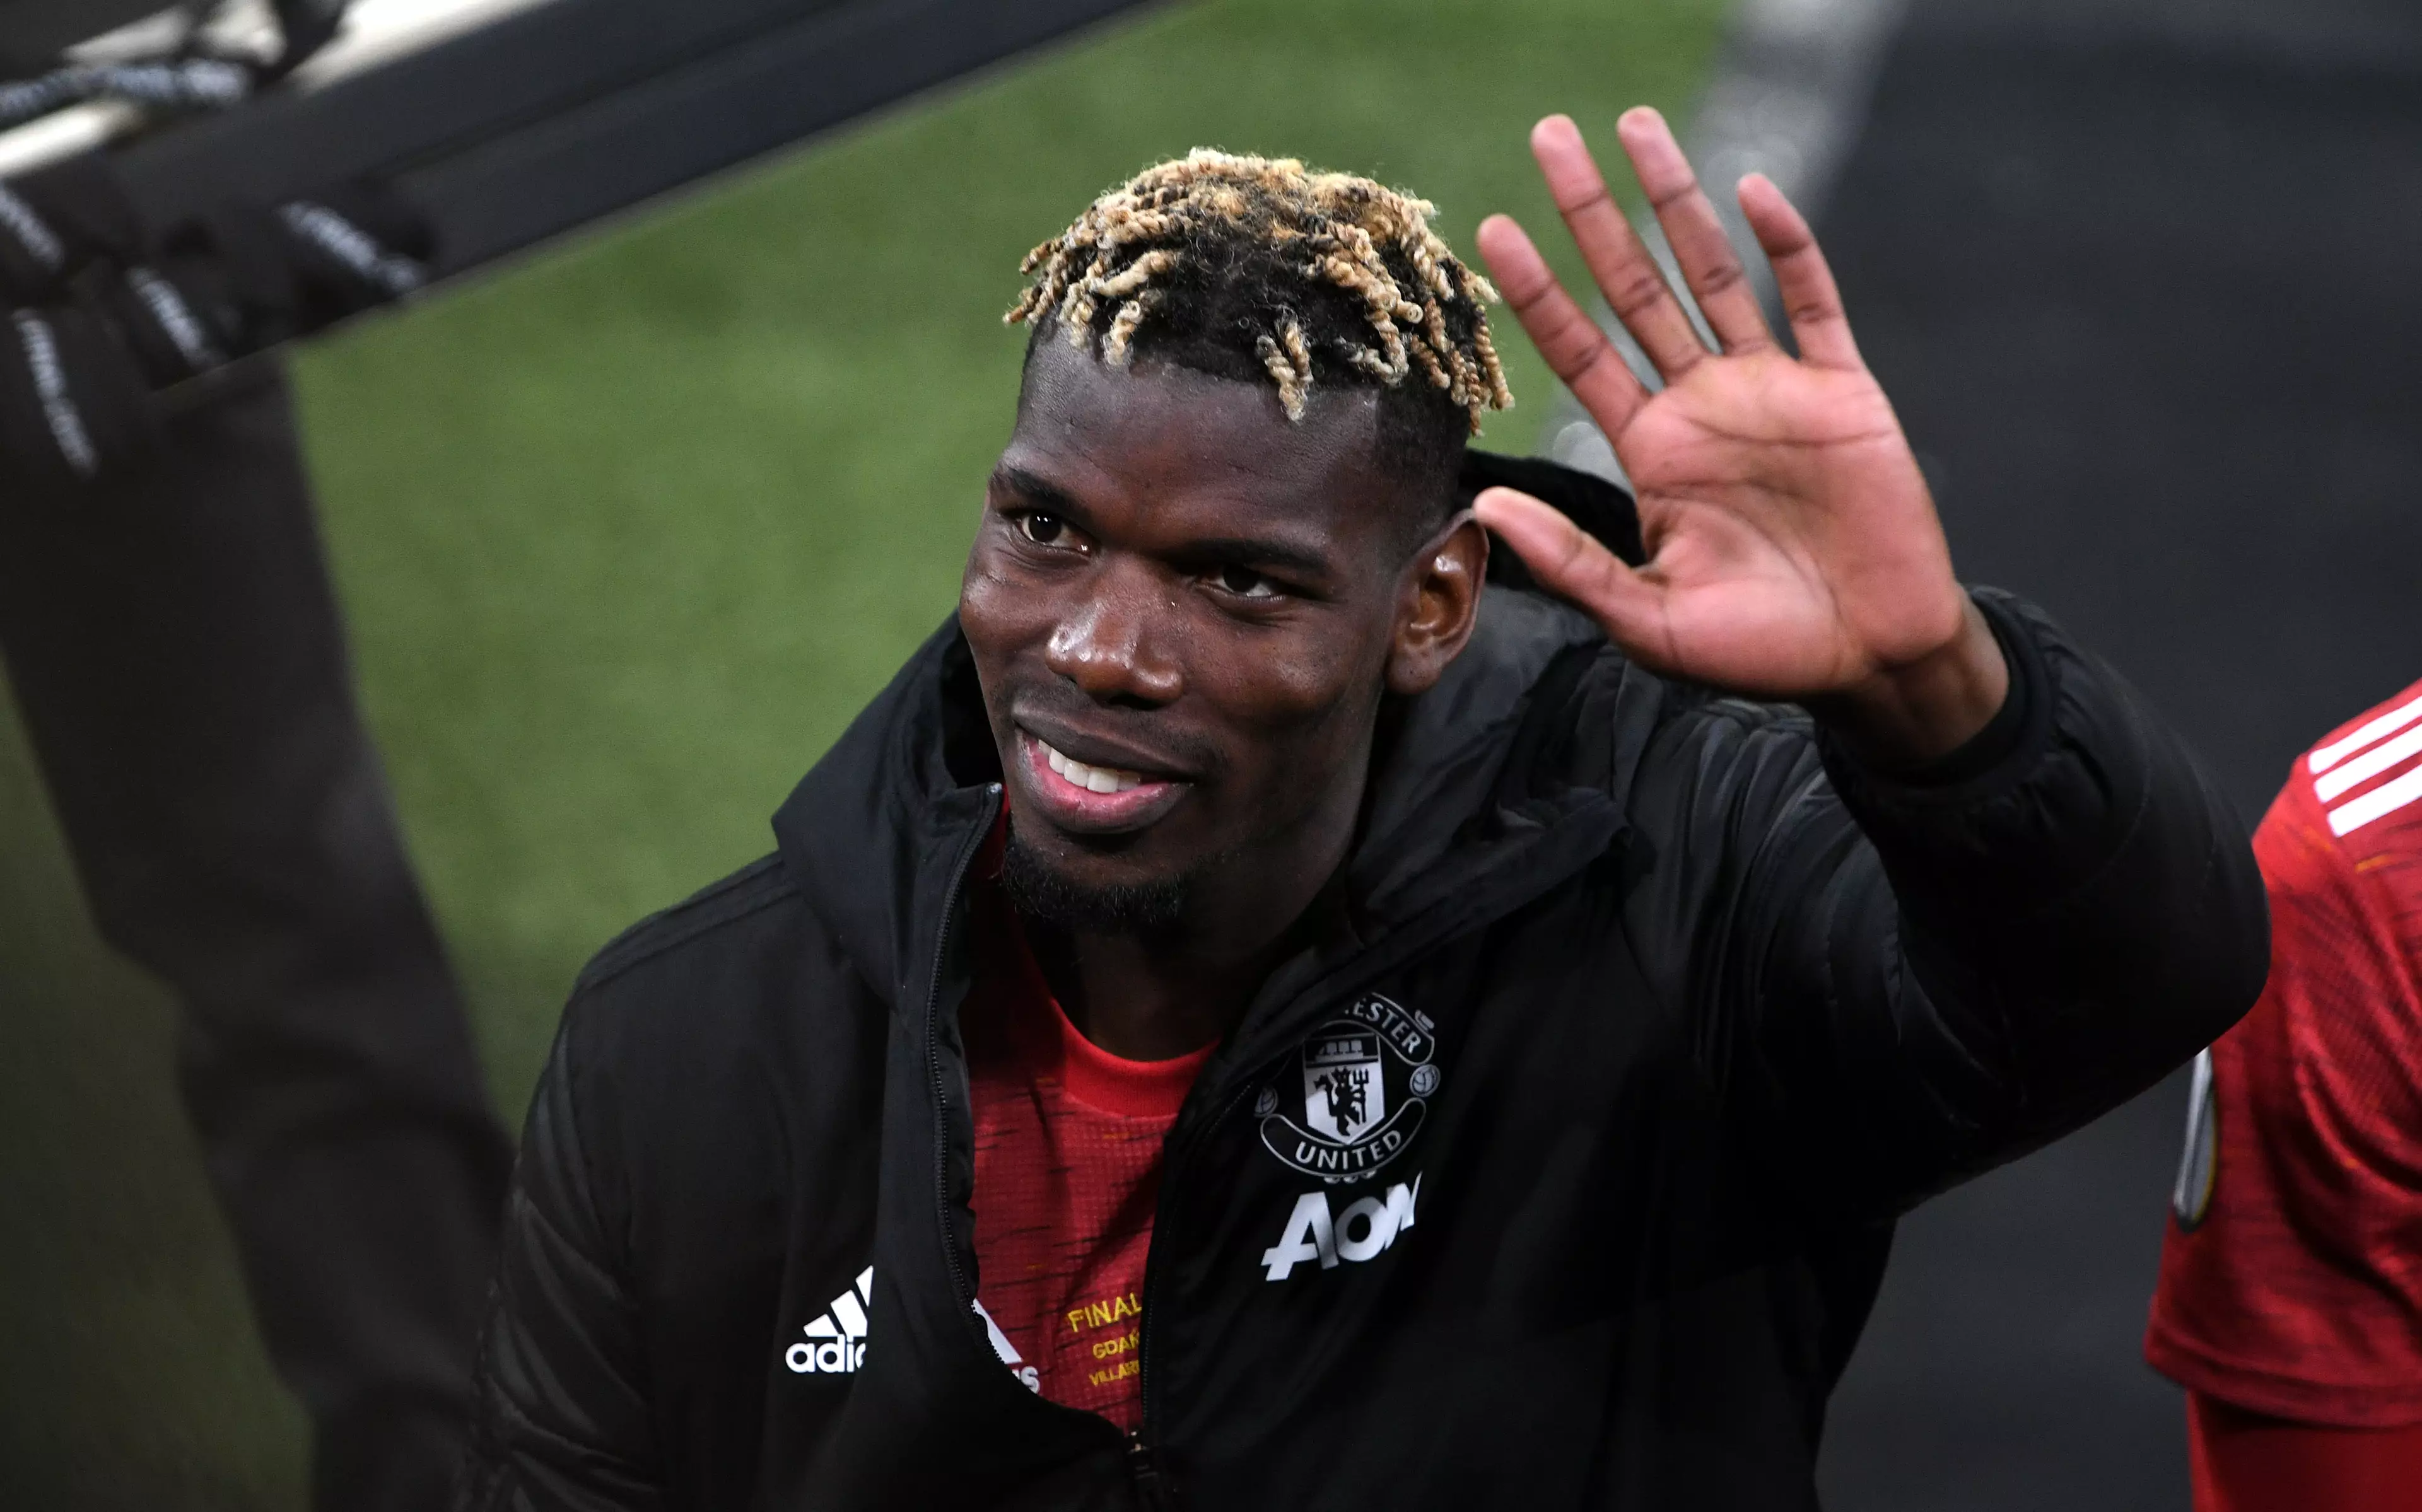 Could Pogba be about to wave goodbye to United. Image: PA Images